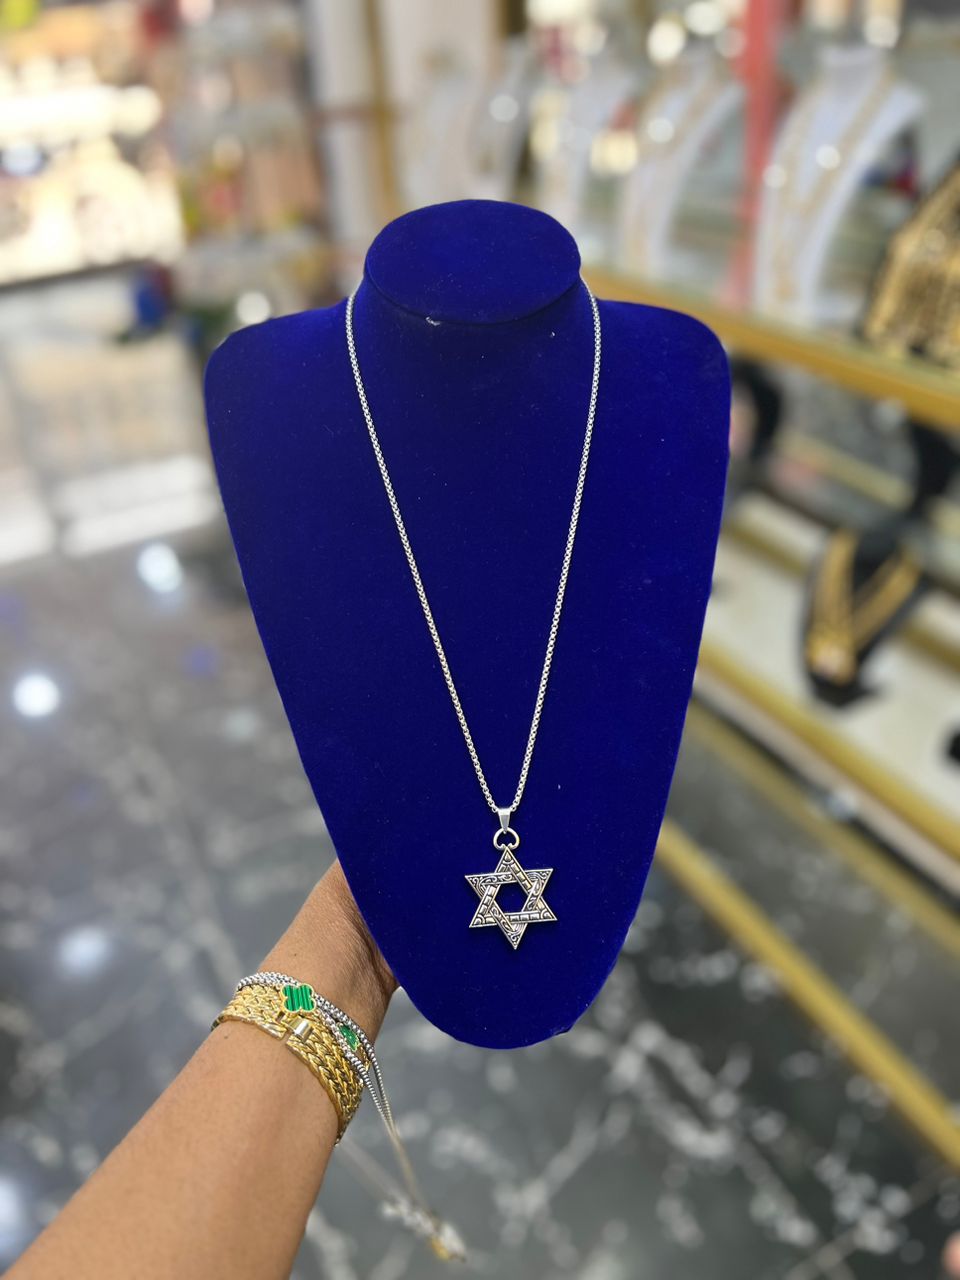 Boys' Dog Tag with Star of David Necklace – JEWishly